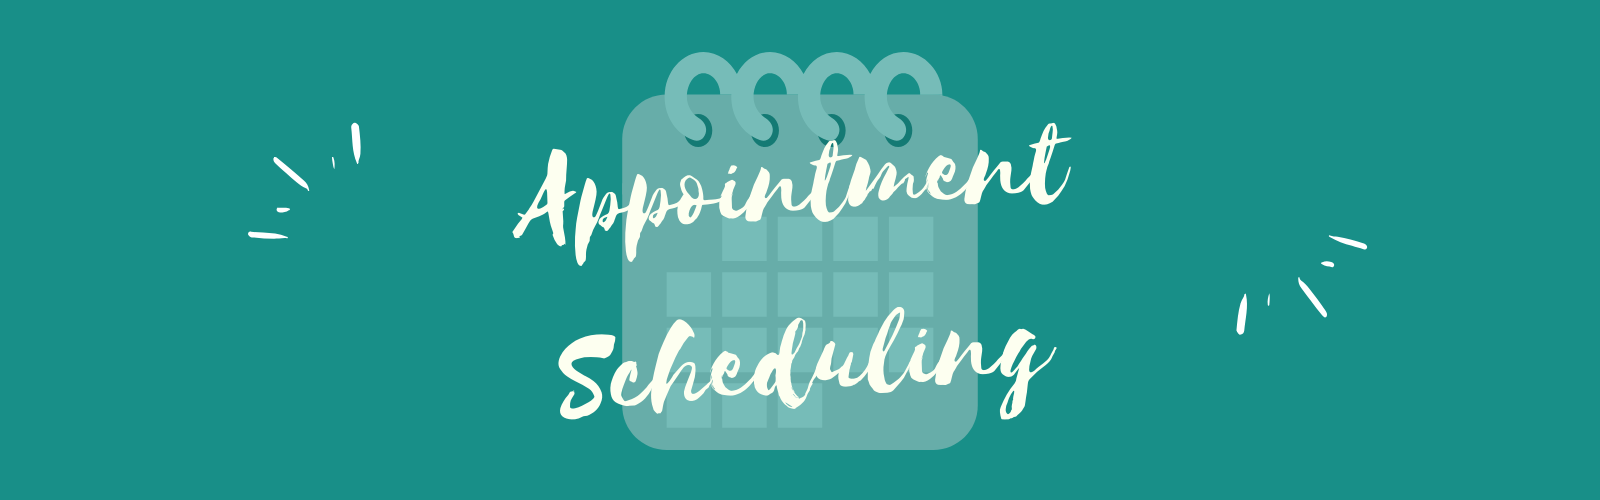 Appointment Scheduling Overview